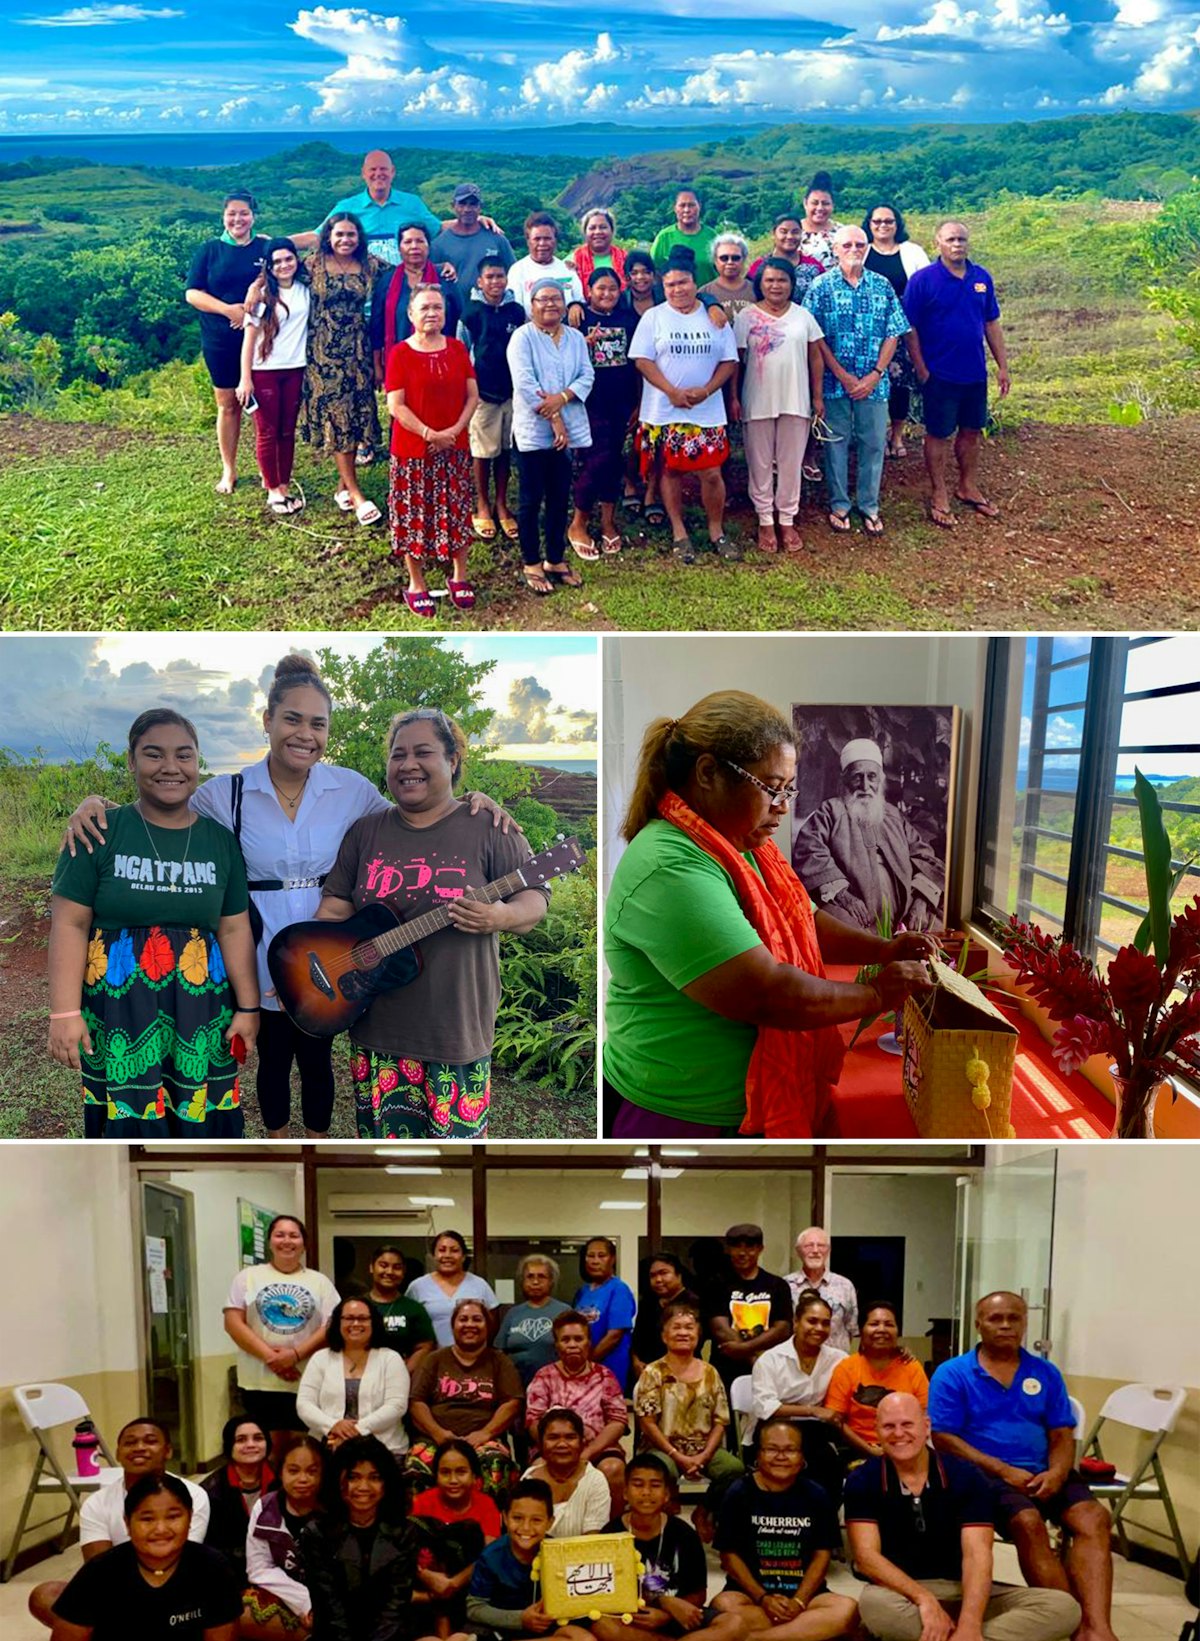 Delegates at the national convention of the Bahá’ís of the Caroline Islands gathered for two days and evenings, consulting on how to intensify Bahá’í efforts in their communities toward social transformation.